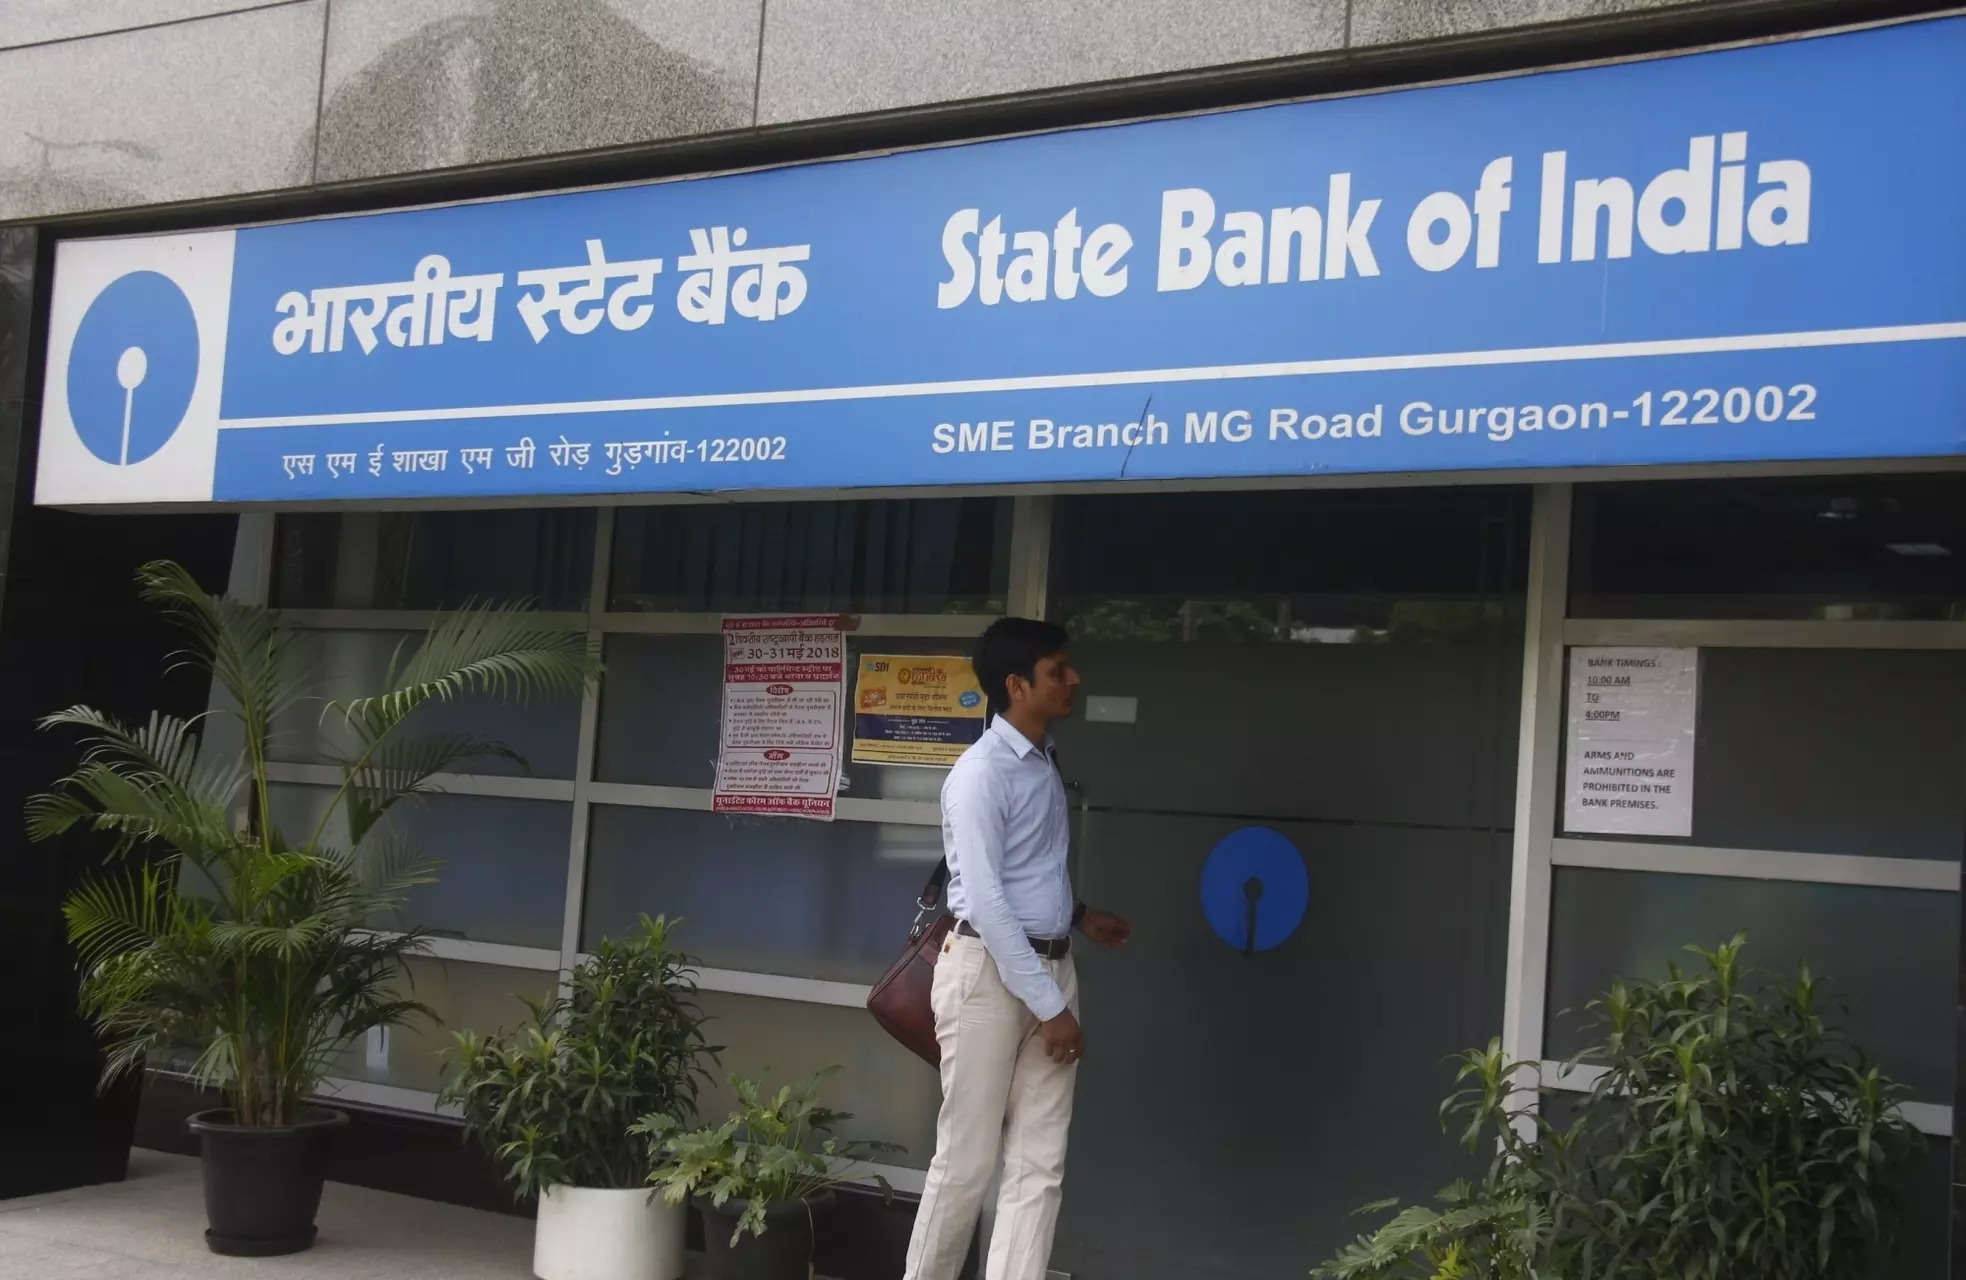 <p>"Annual increase in salary and allowances is agreed at 17 per cent, of the annual pay slip expenses for FY 2021-22, which works out to Rs 12,449 crores for all public sector banks including SBI," the MoU notes</p>